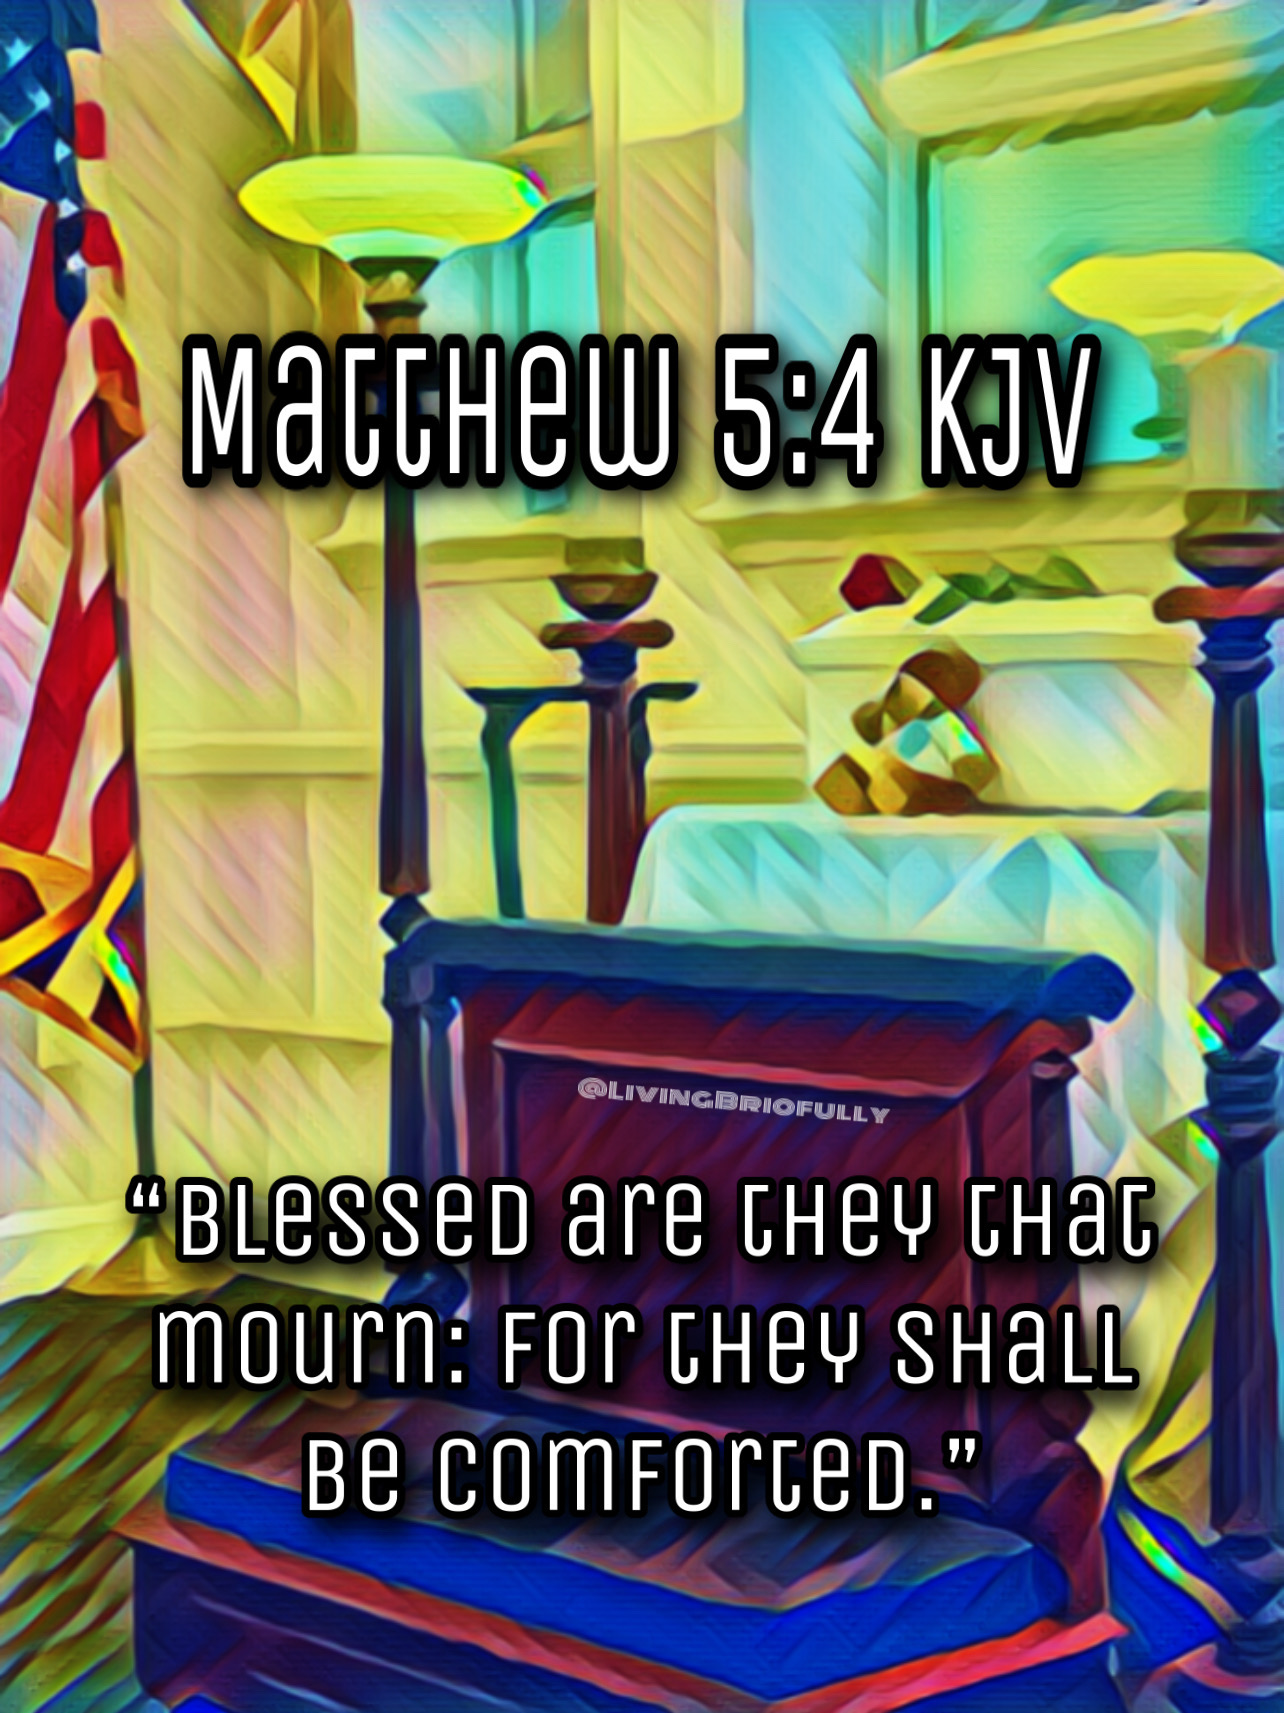 "Blessed are they that mourn: for they shall be comforted." Matthew 5:4 KJV